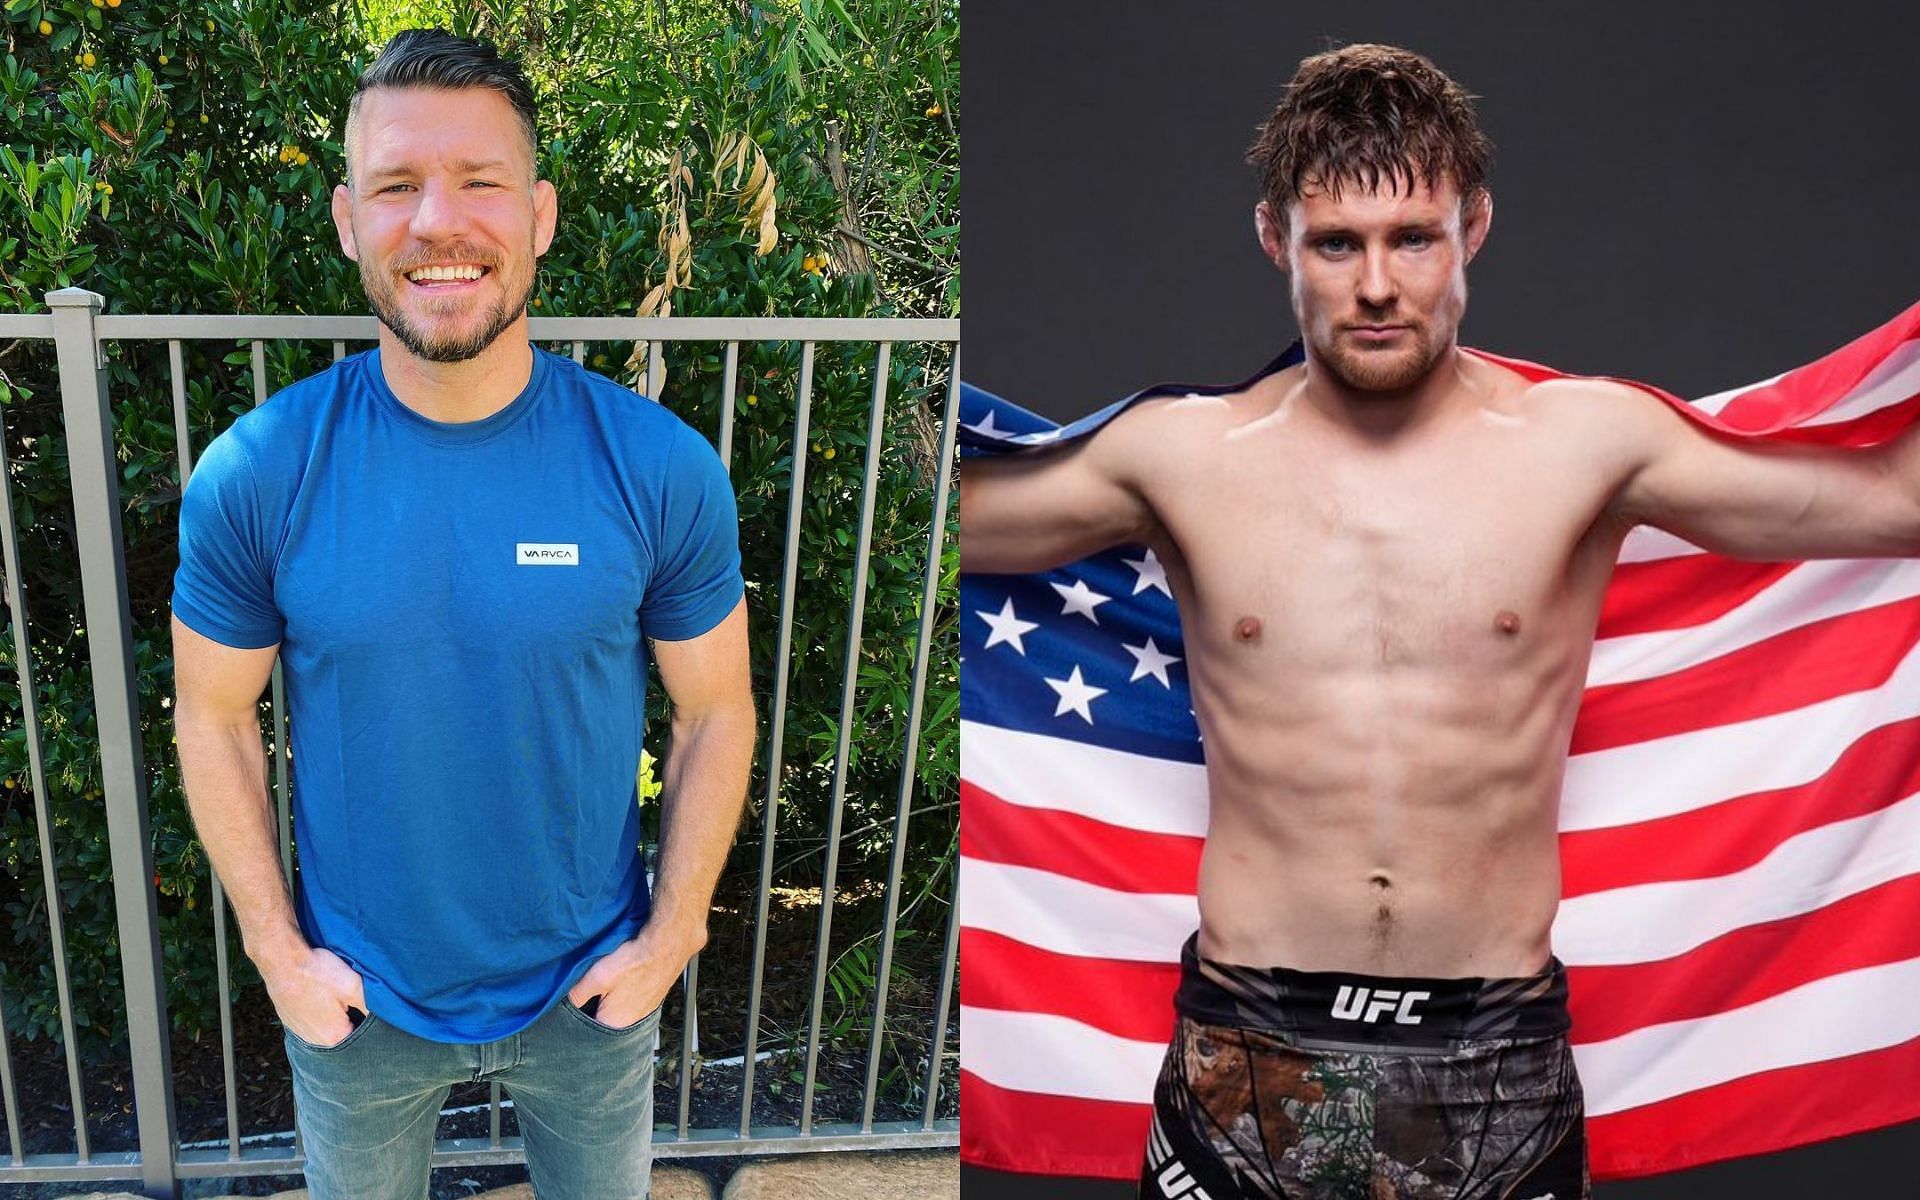 “That’s a special human being” – Michael Bisping praises Bryce Mitchell for pledging half his UFC 272 pay to children’s hospital